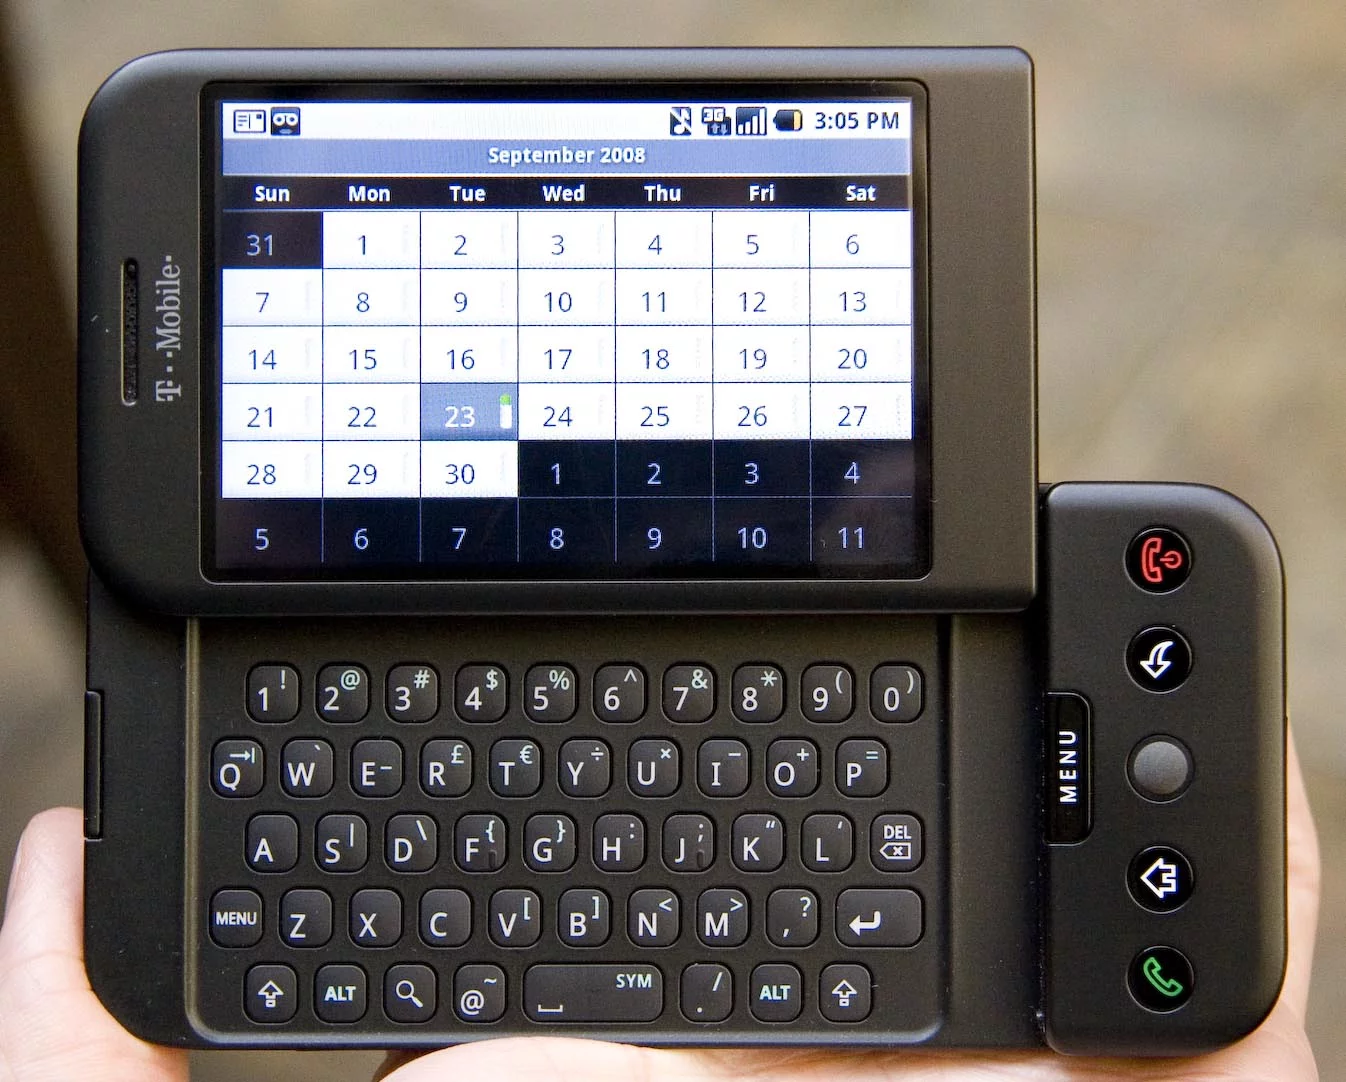 T-Mobile G1 / HTC Dream, The Very First Mobile Phone Smartphone To Use Android.